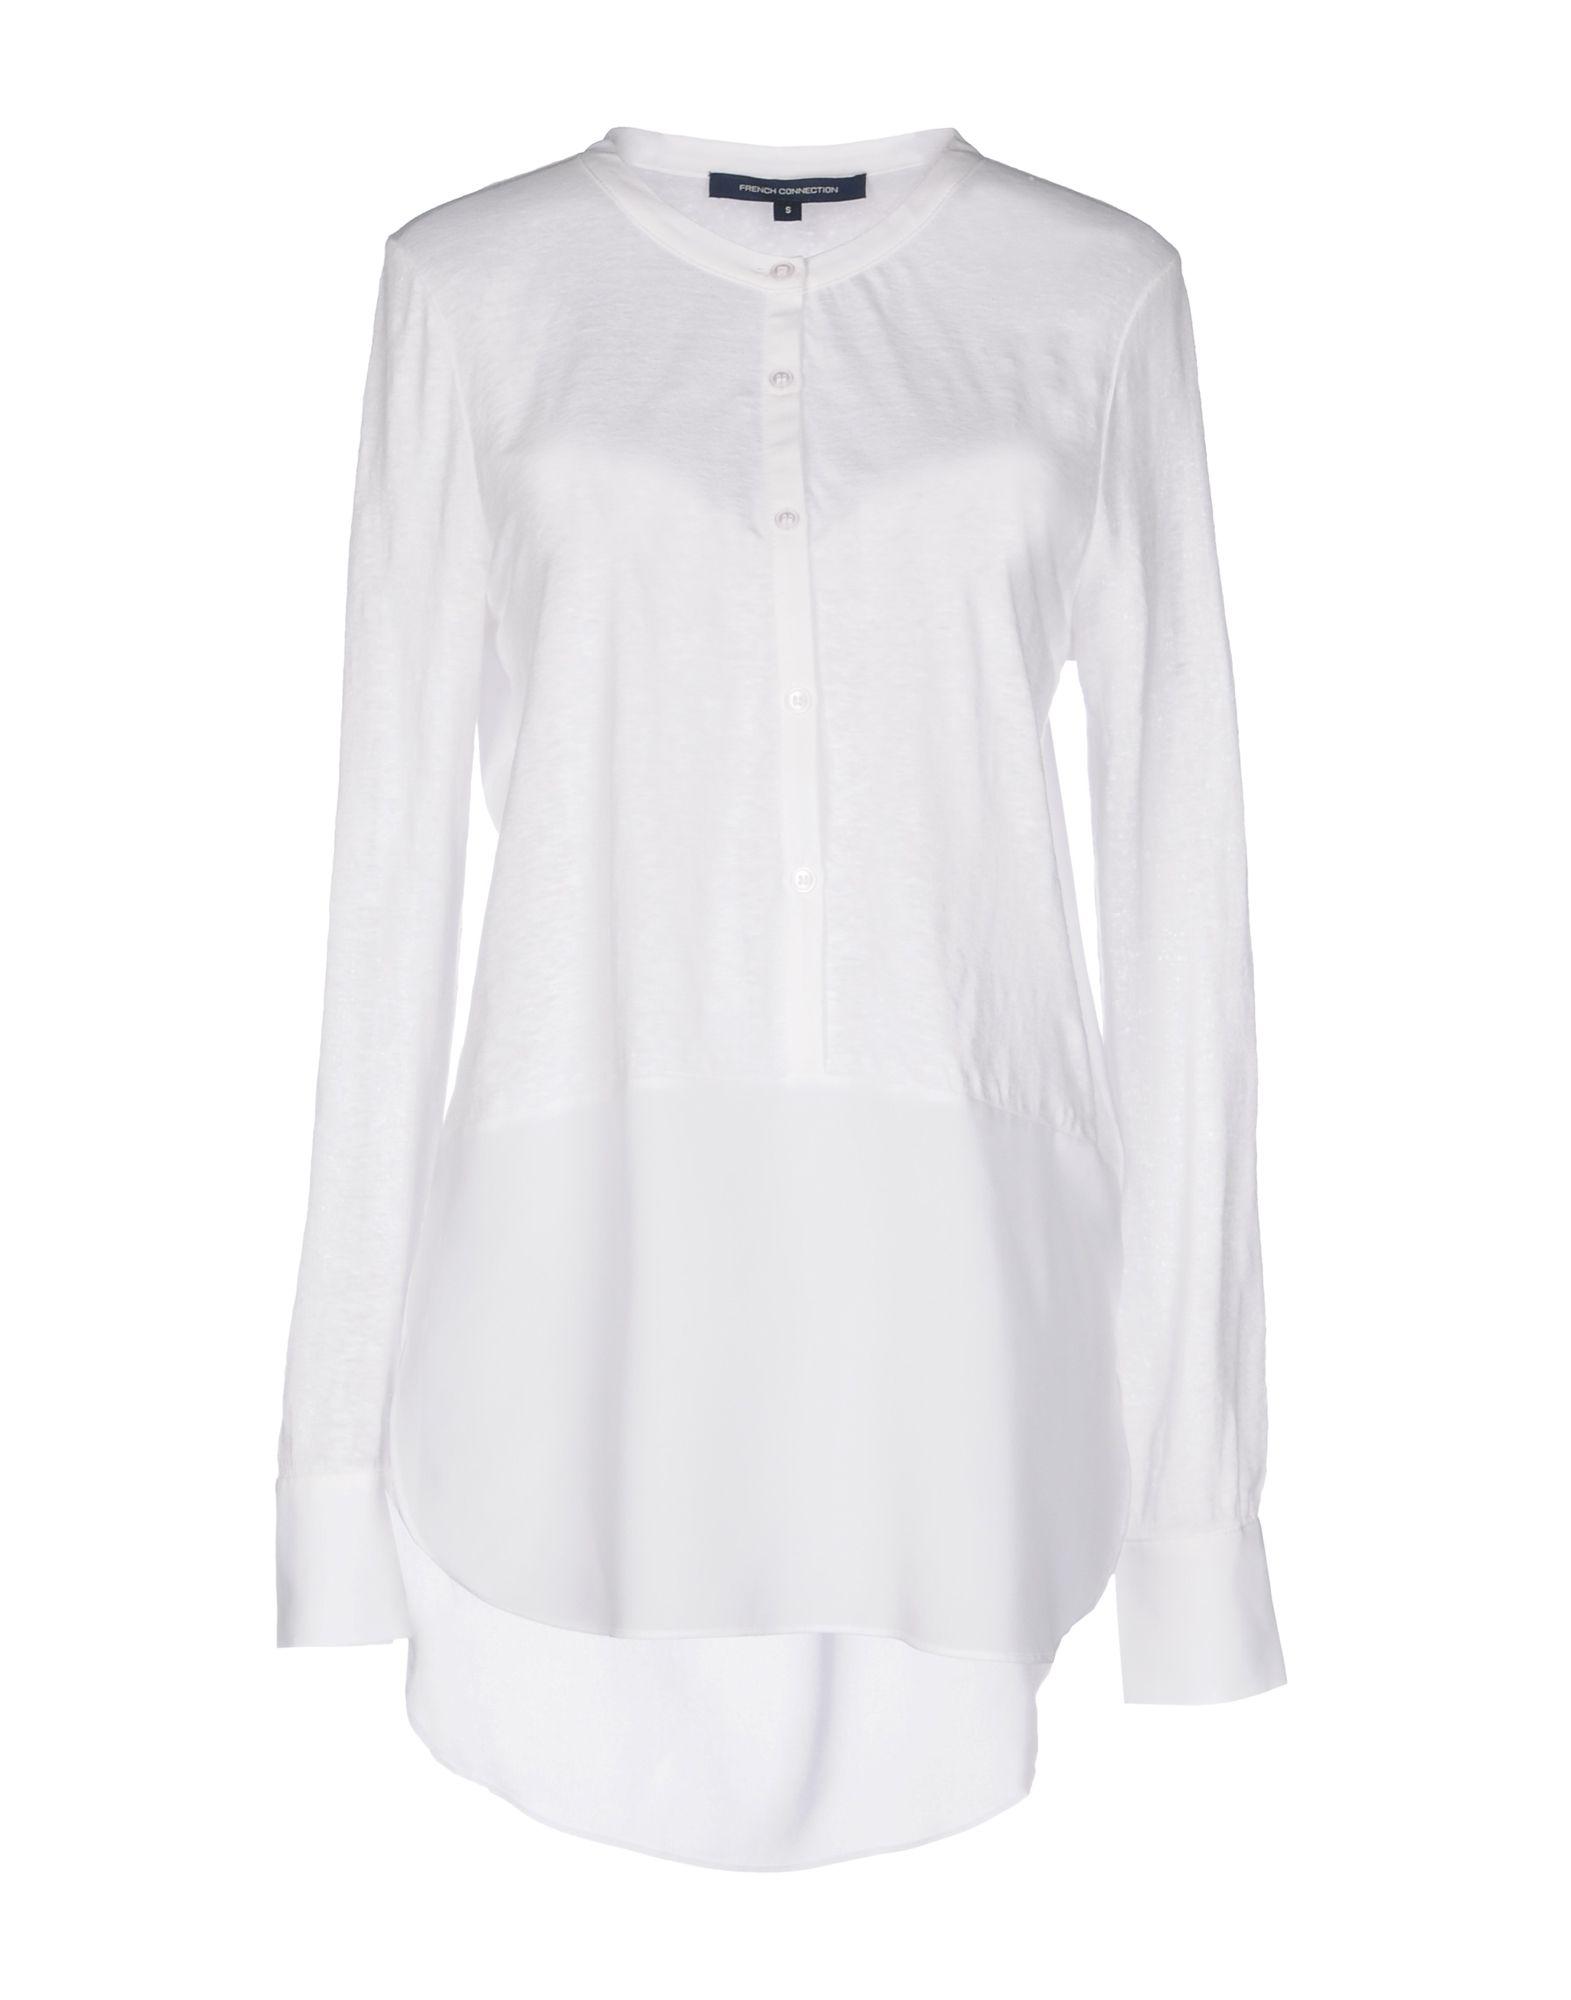 French Connection Linen Blouse in White - Lyst